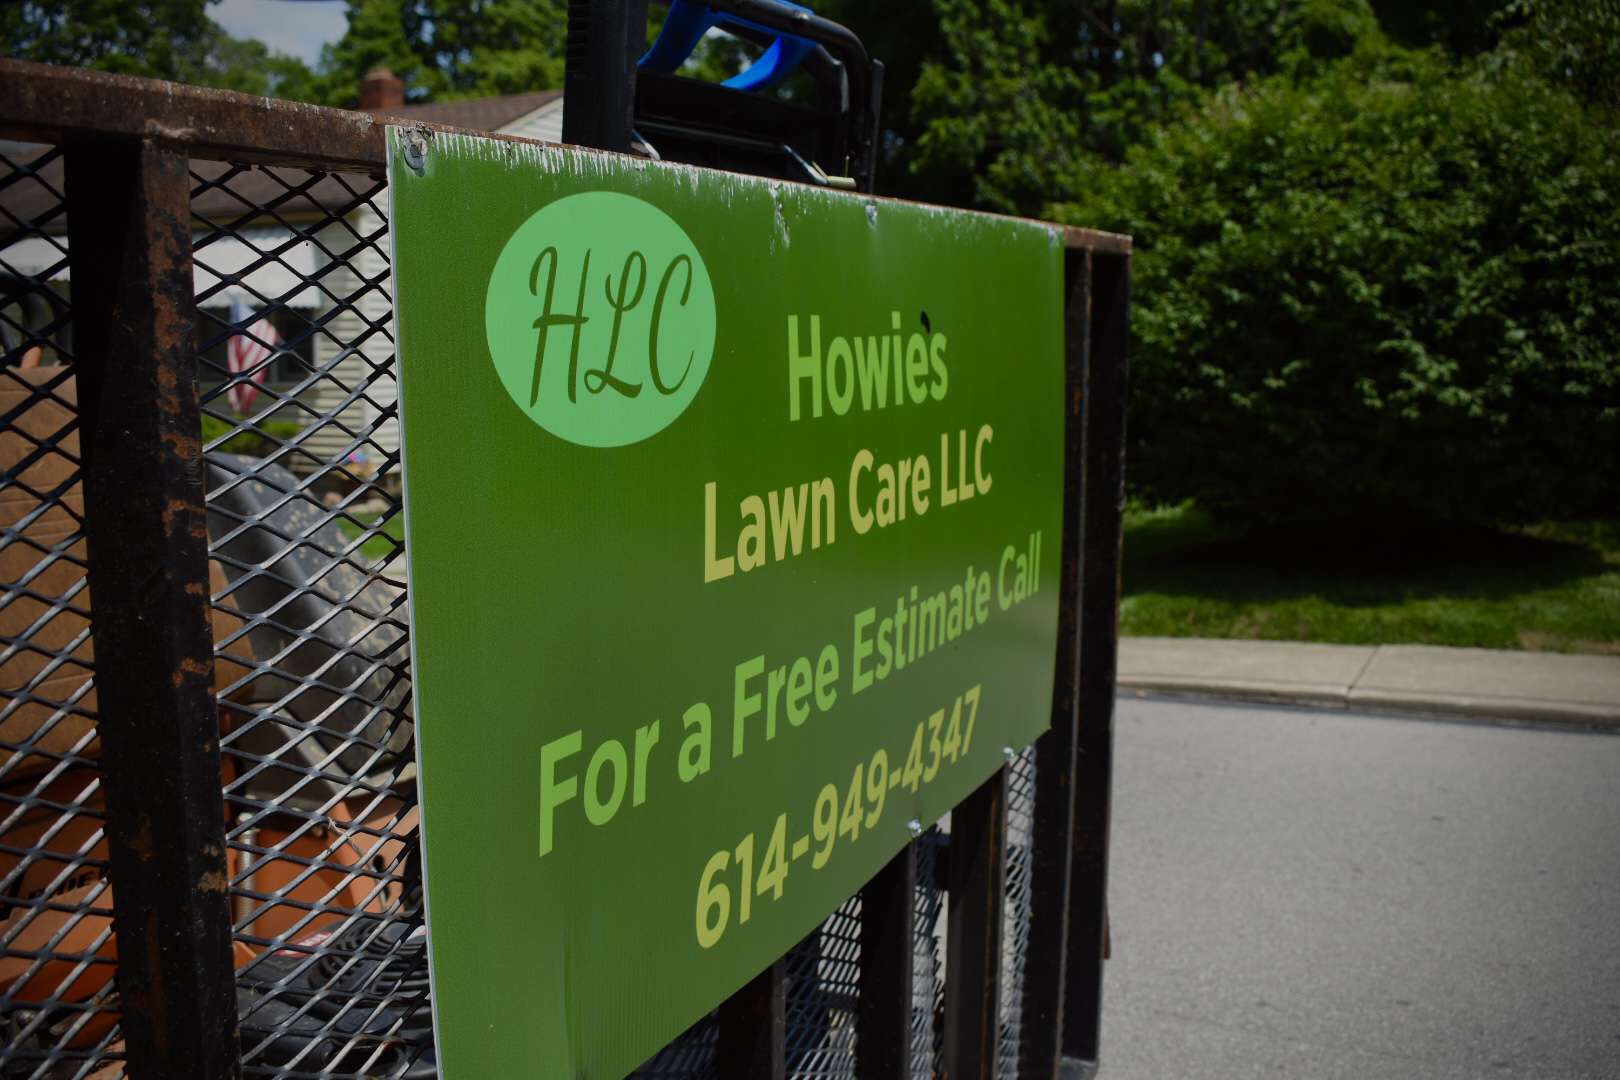 Howies Lawn Care LLC Middle Pike, West Jefferson Ohio 43162